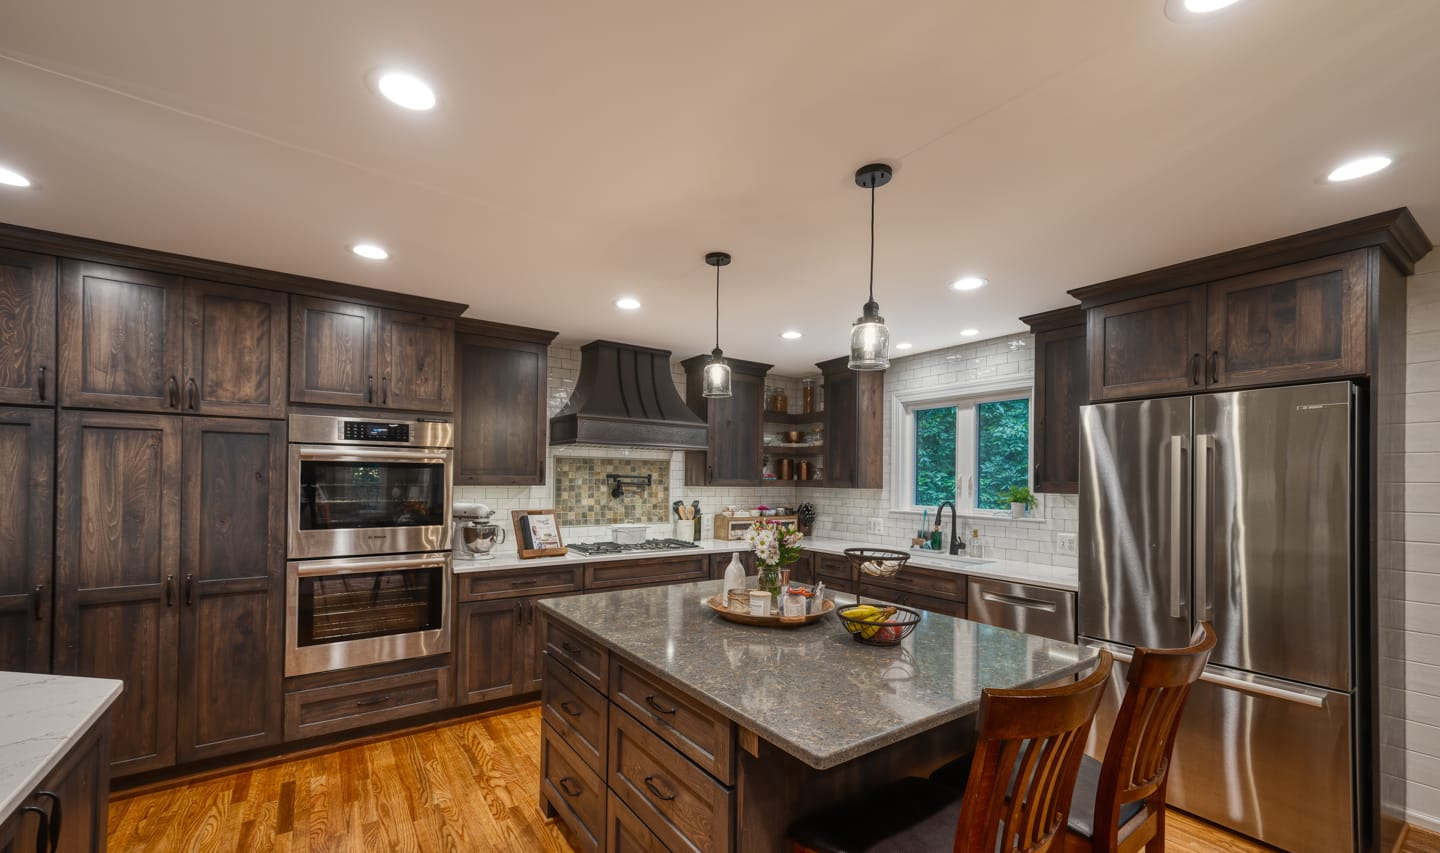 Kitchen remodel, Fairfax Station, VA featuring Koch Imperial line cabinets with Charleston door style in a Stone stain color